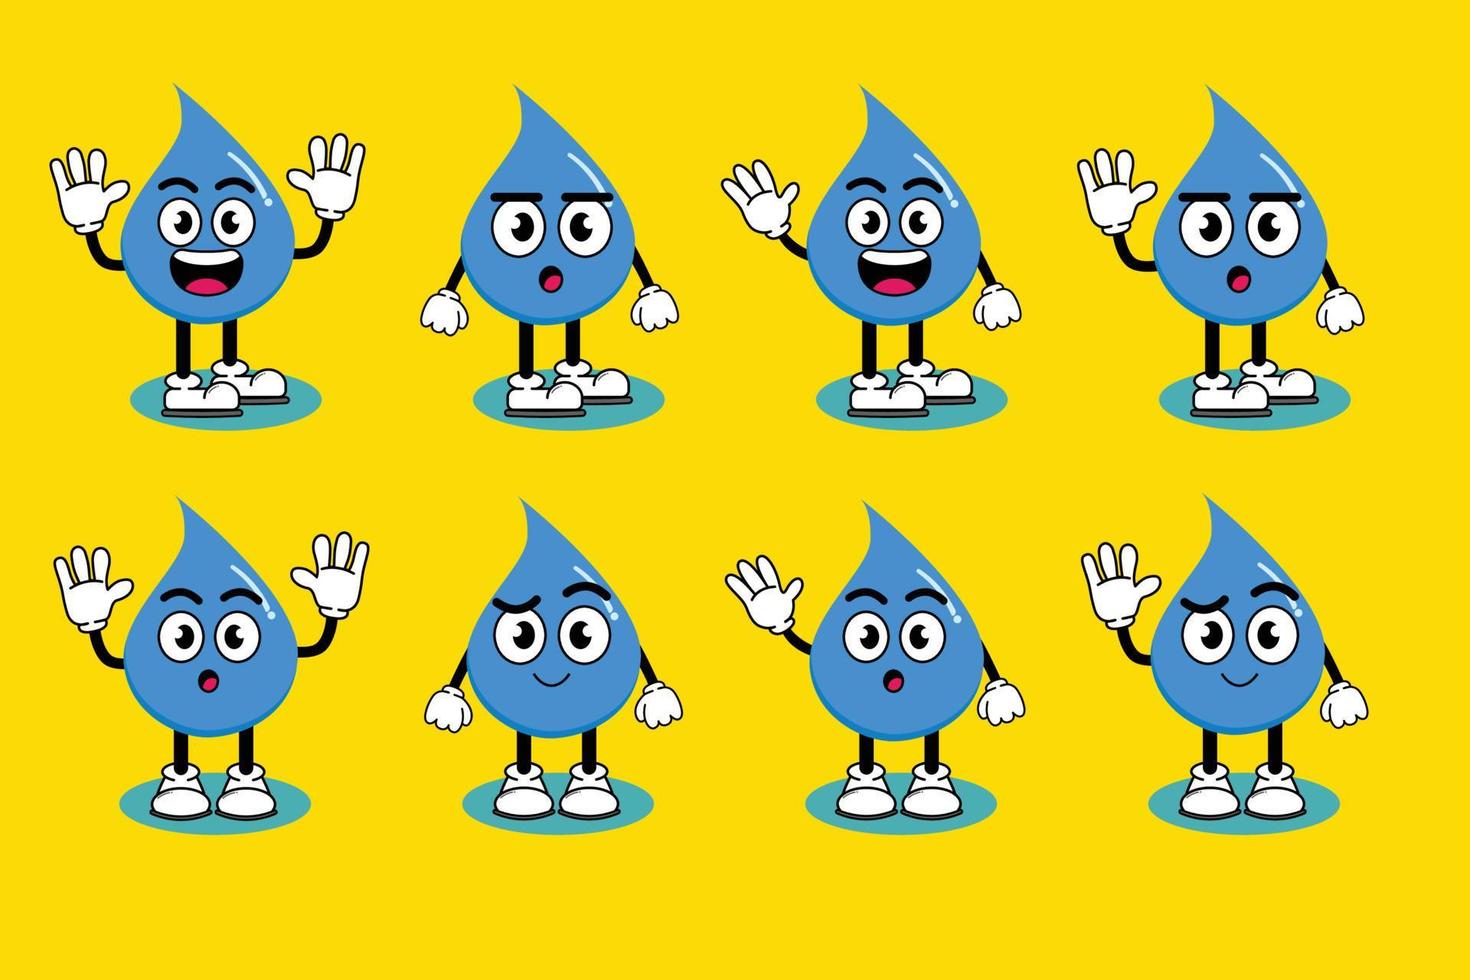 Illustration vector graphic cartoon character of Cute mascot water with pose. Suitable for children book illustration and element design.